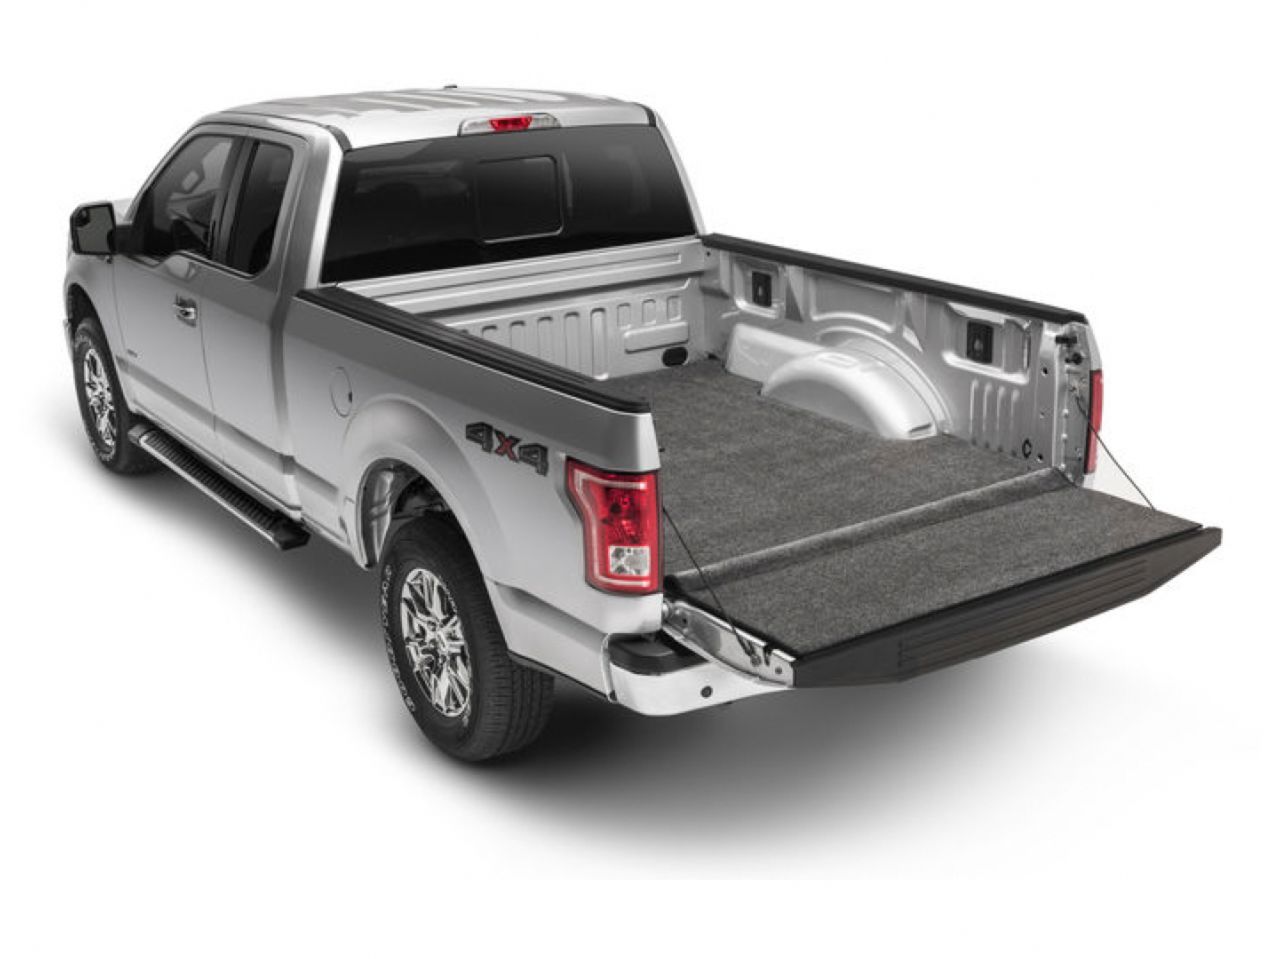 Bedrug Truck Bed Accessories XLTBMC07LBS Item Image